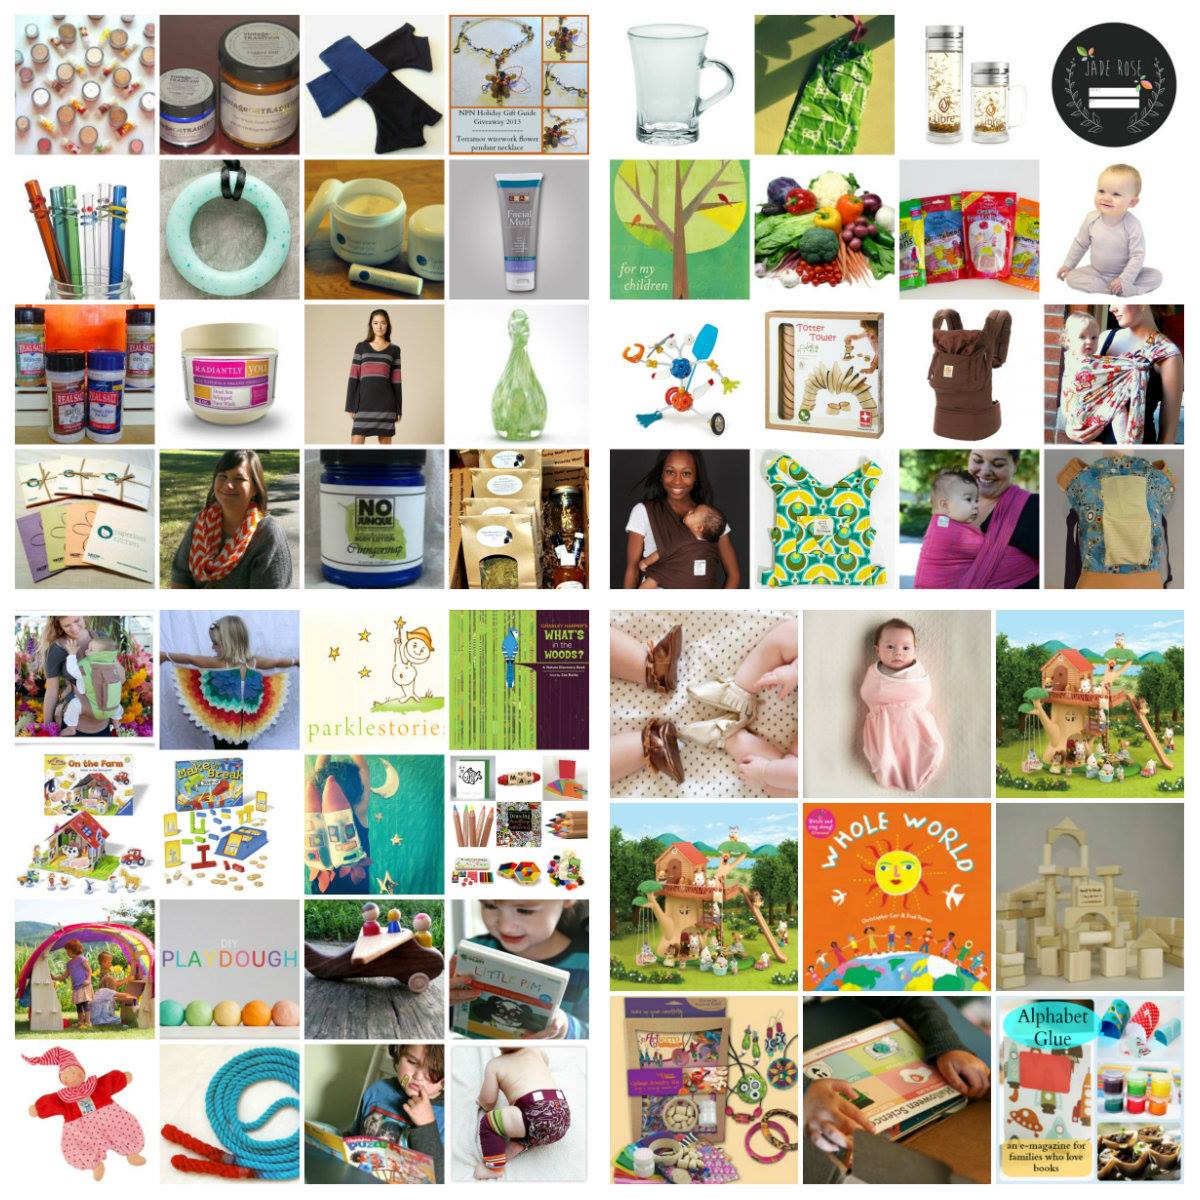 NPN Holiday Gift Guide & Giveaway {12.6; 26 winners; US; $2,500}